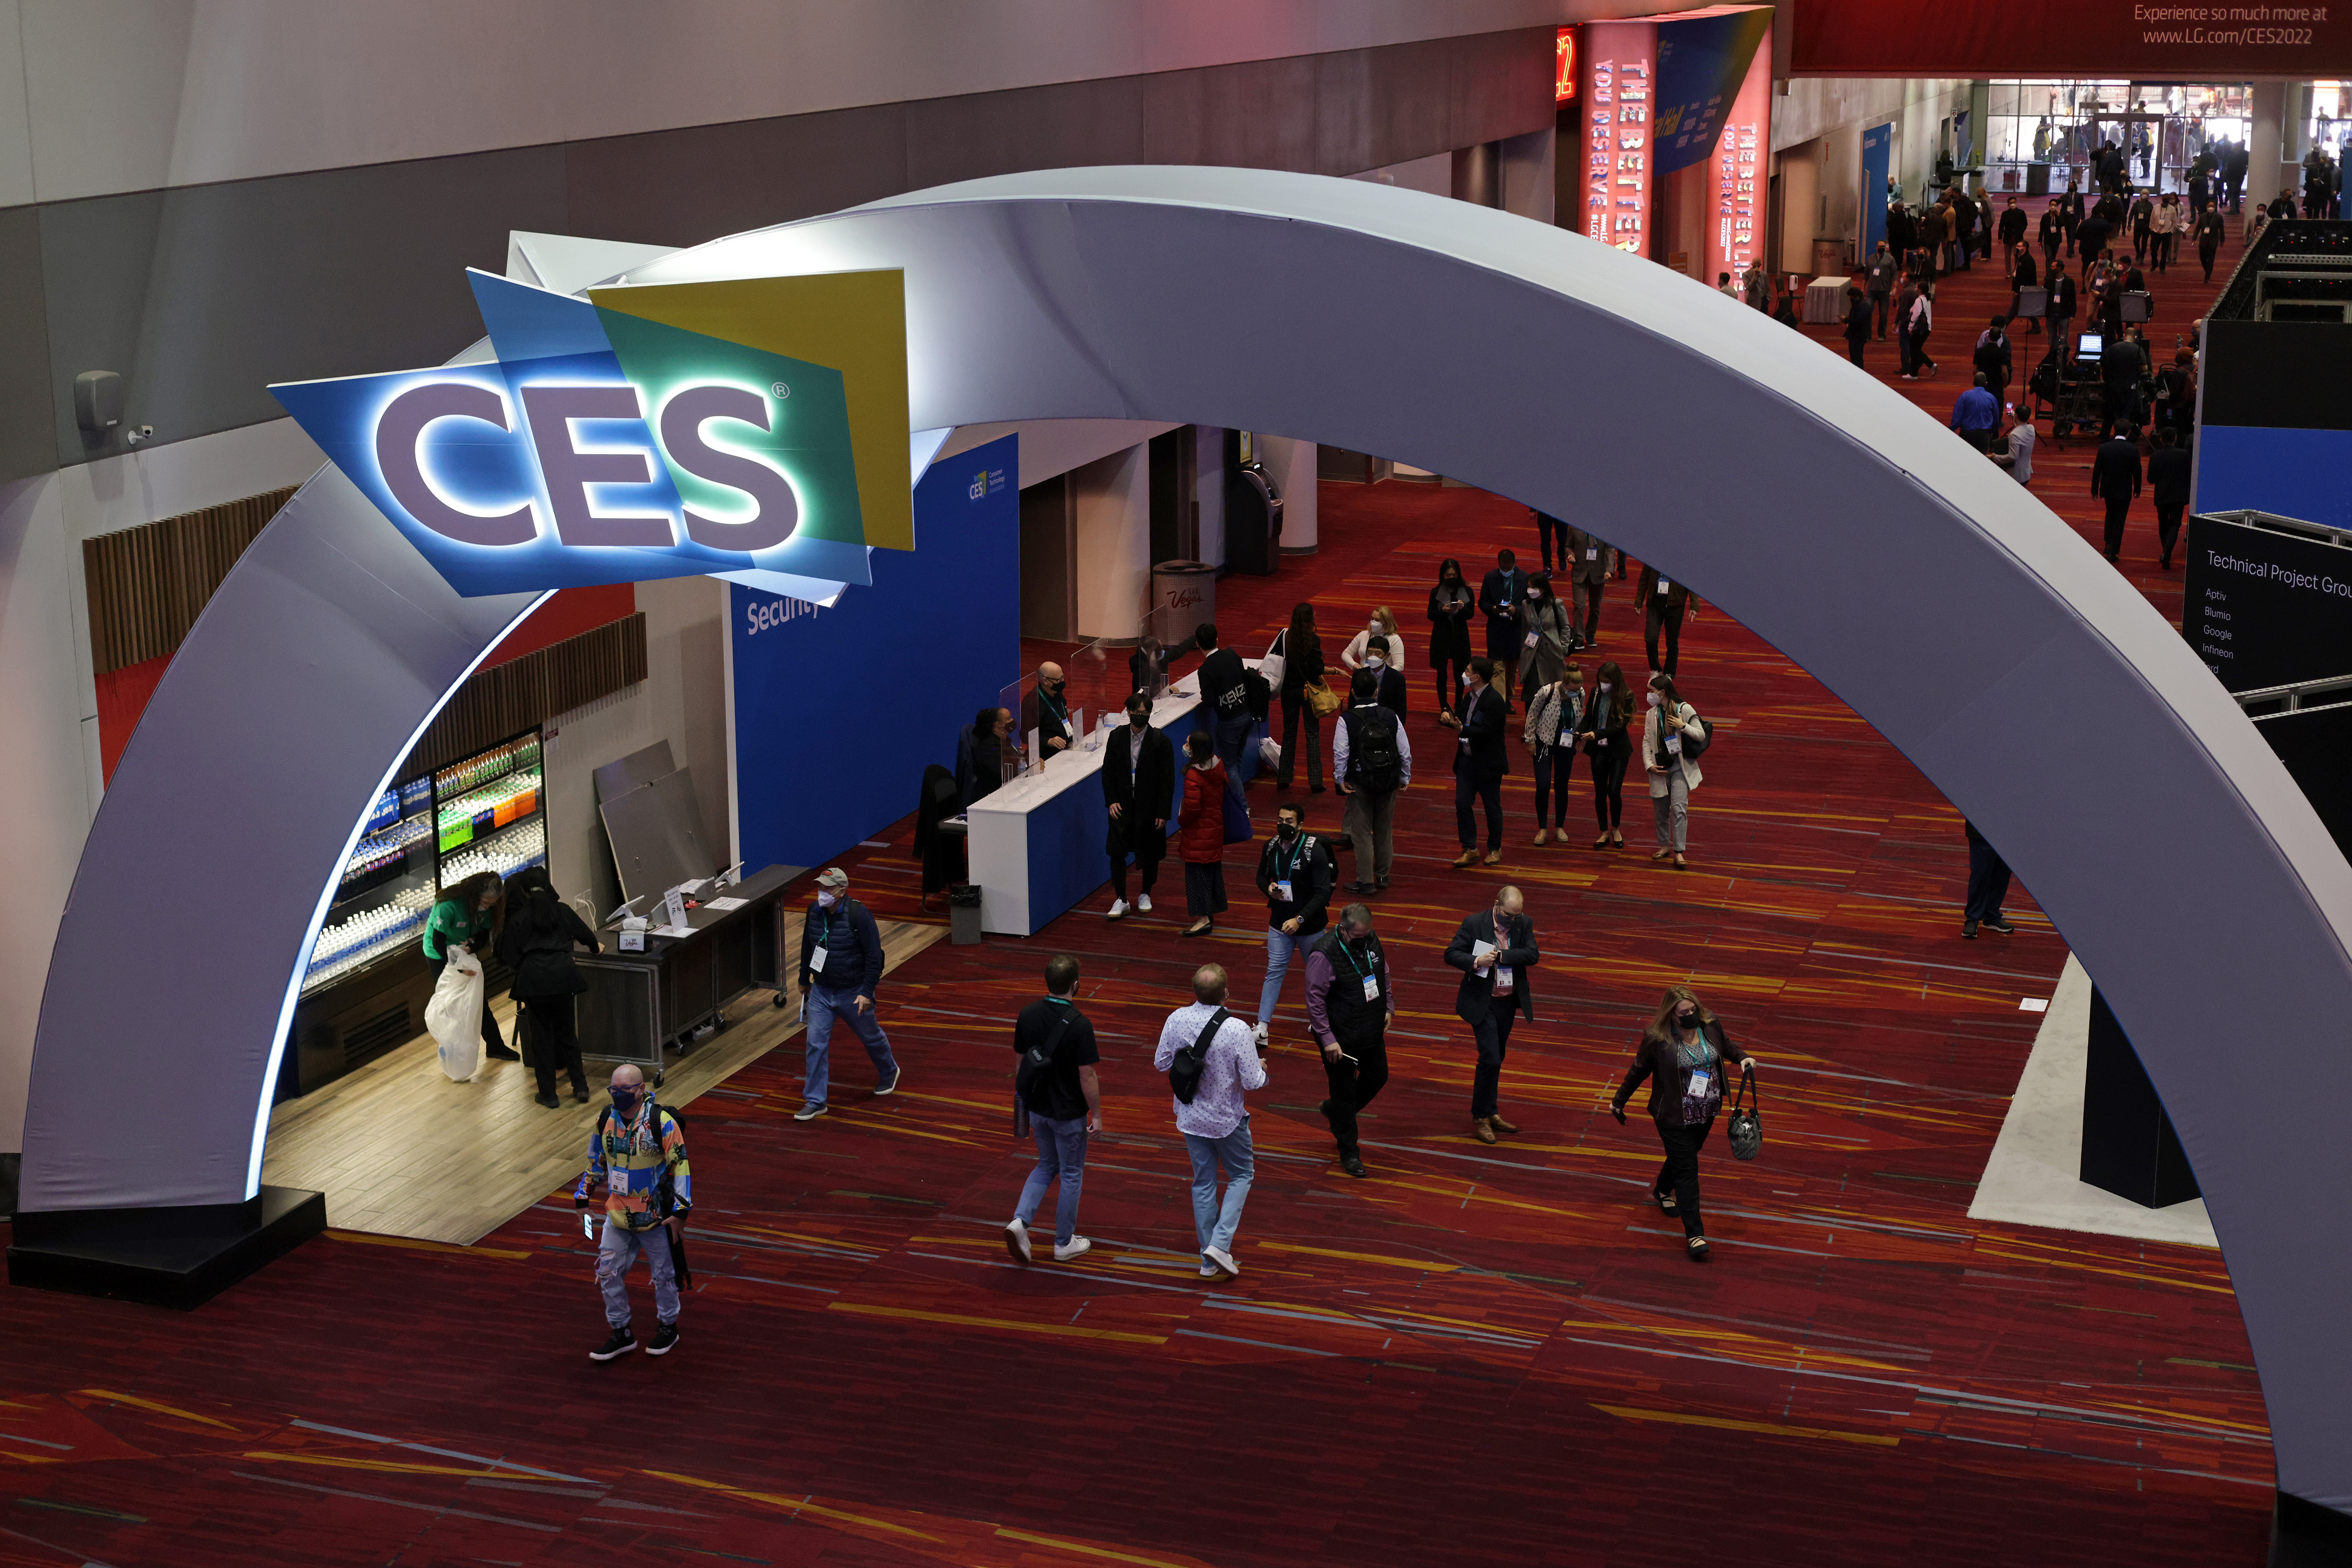 LAS VEGAS, NEVADA - JANUARY 05: Attendees pass through a hallway at the Las Vegas Convention Center on Day 1 of CES 2022, January 5, 2022 in Las Vegas, Nevada. CES, the world's largest annual consumer technology trade show, is being held in person through January 7, with some companies deciding to participate virtually only or canceling their attendance due to concerns over the major surge in COVID-19 cases. (Photo by Alex Wong/Getty Images)